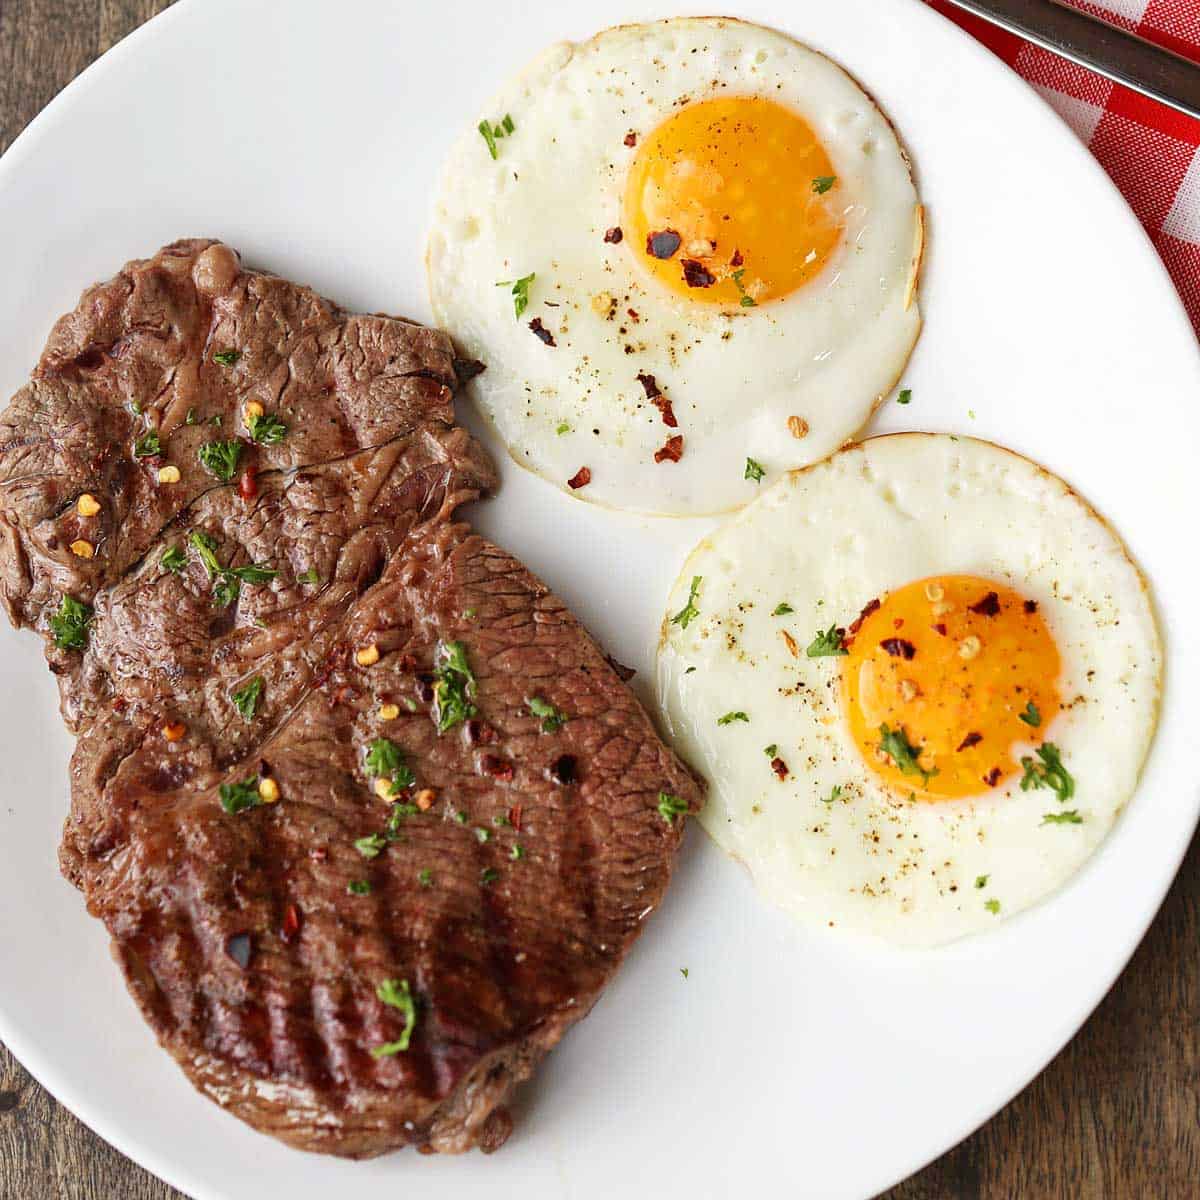 steak-and-eggs-featured-2021.jpg